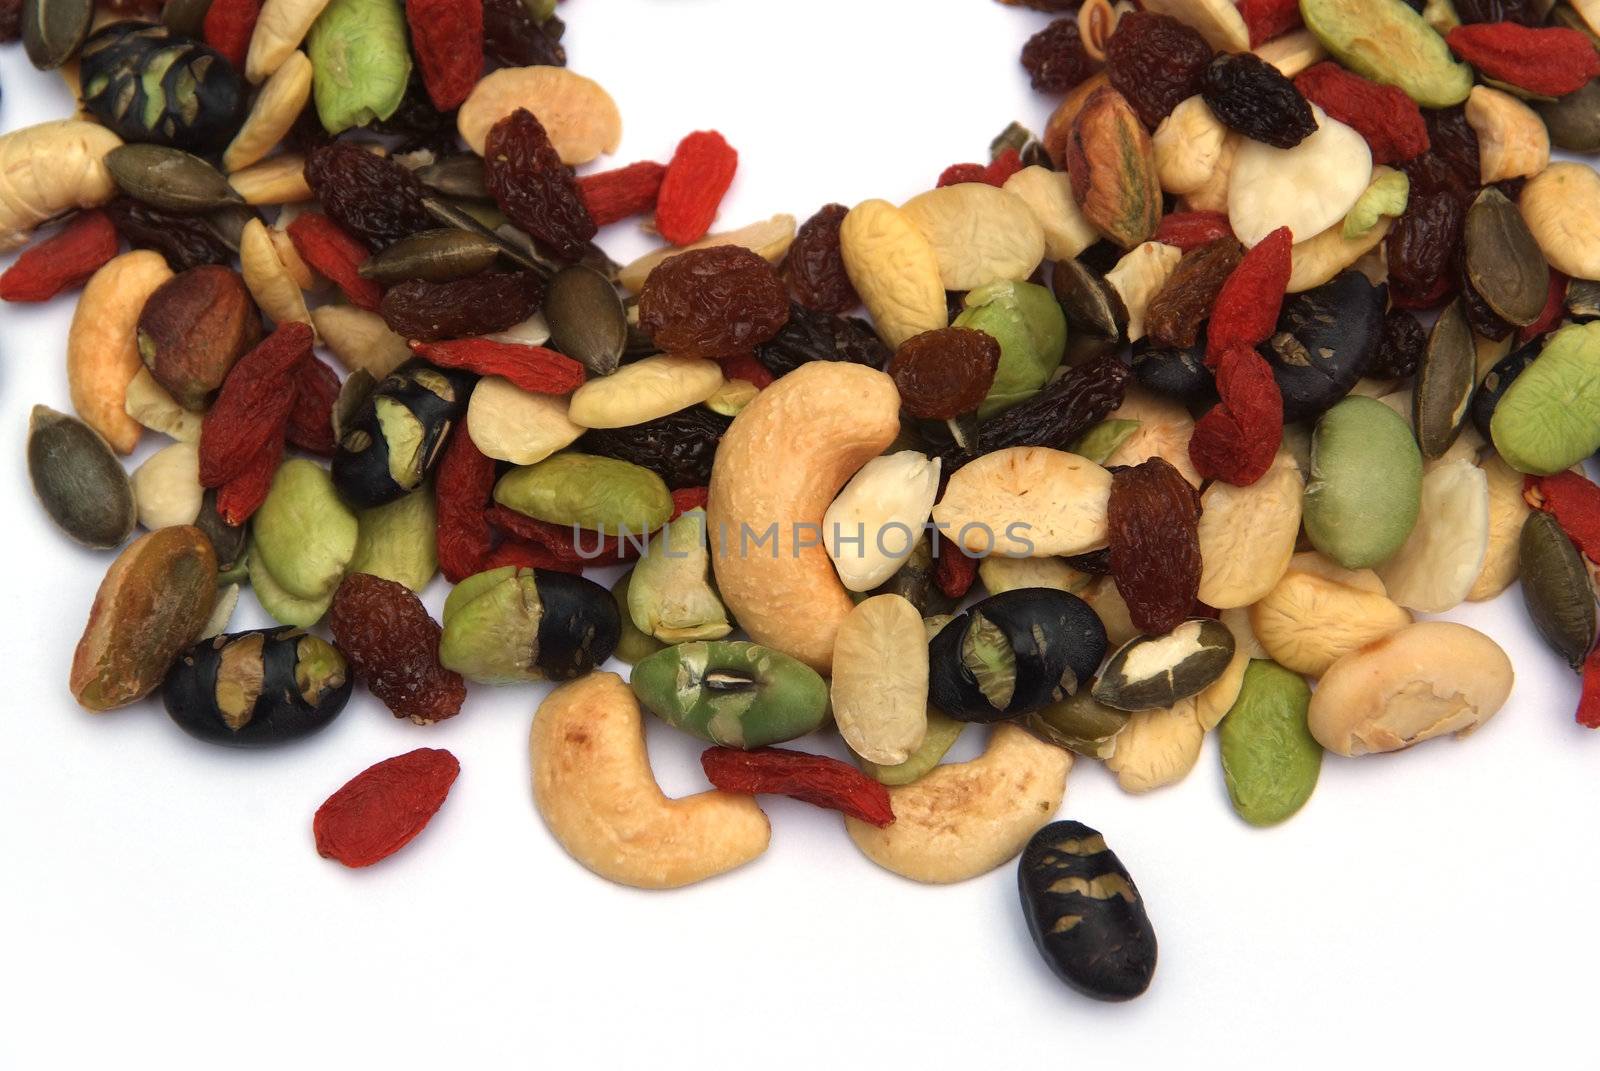 organic mixed nuts and dry fruits on white background